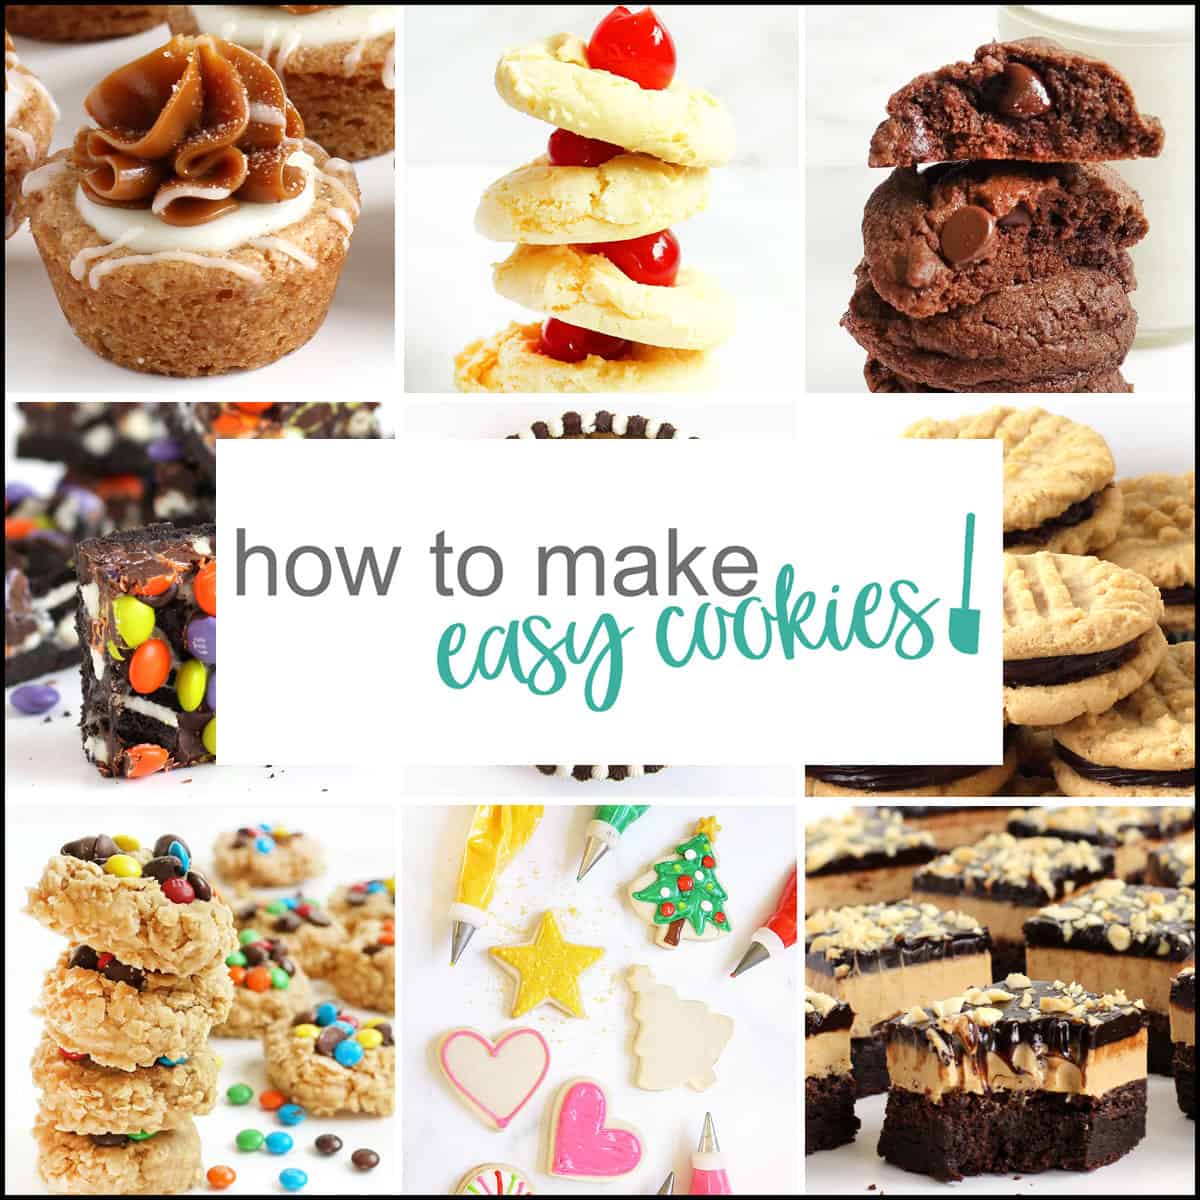 How to make Easy Cookies collage of cooked images